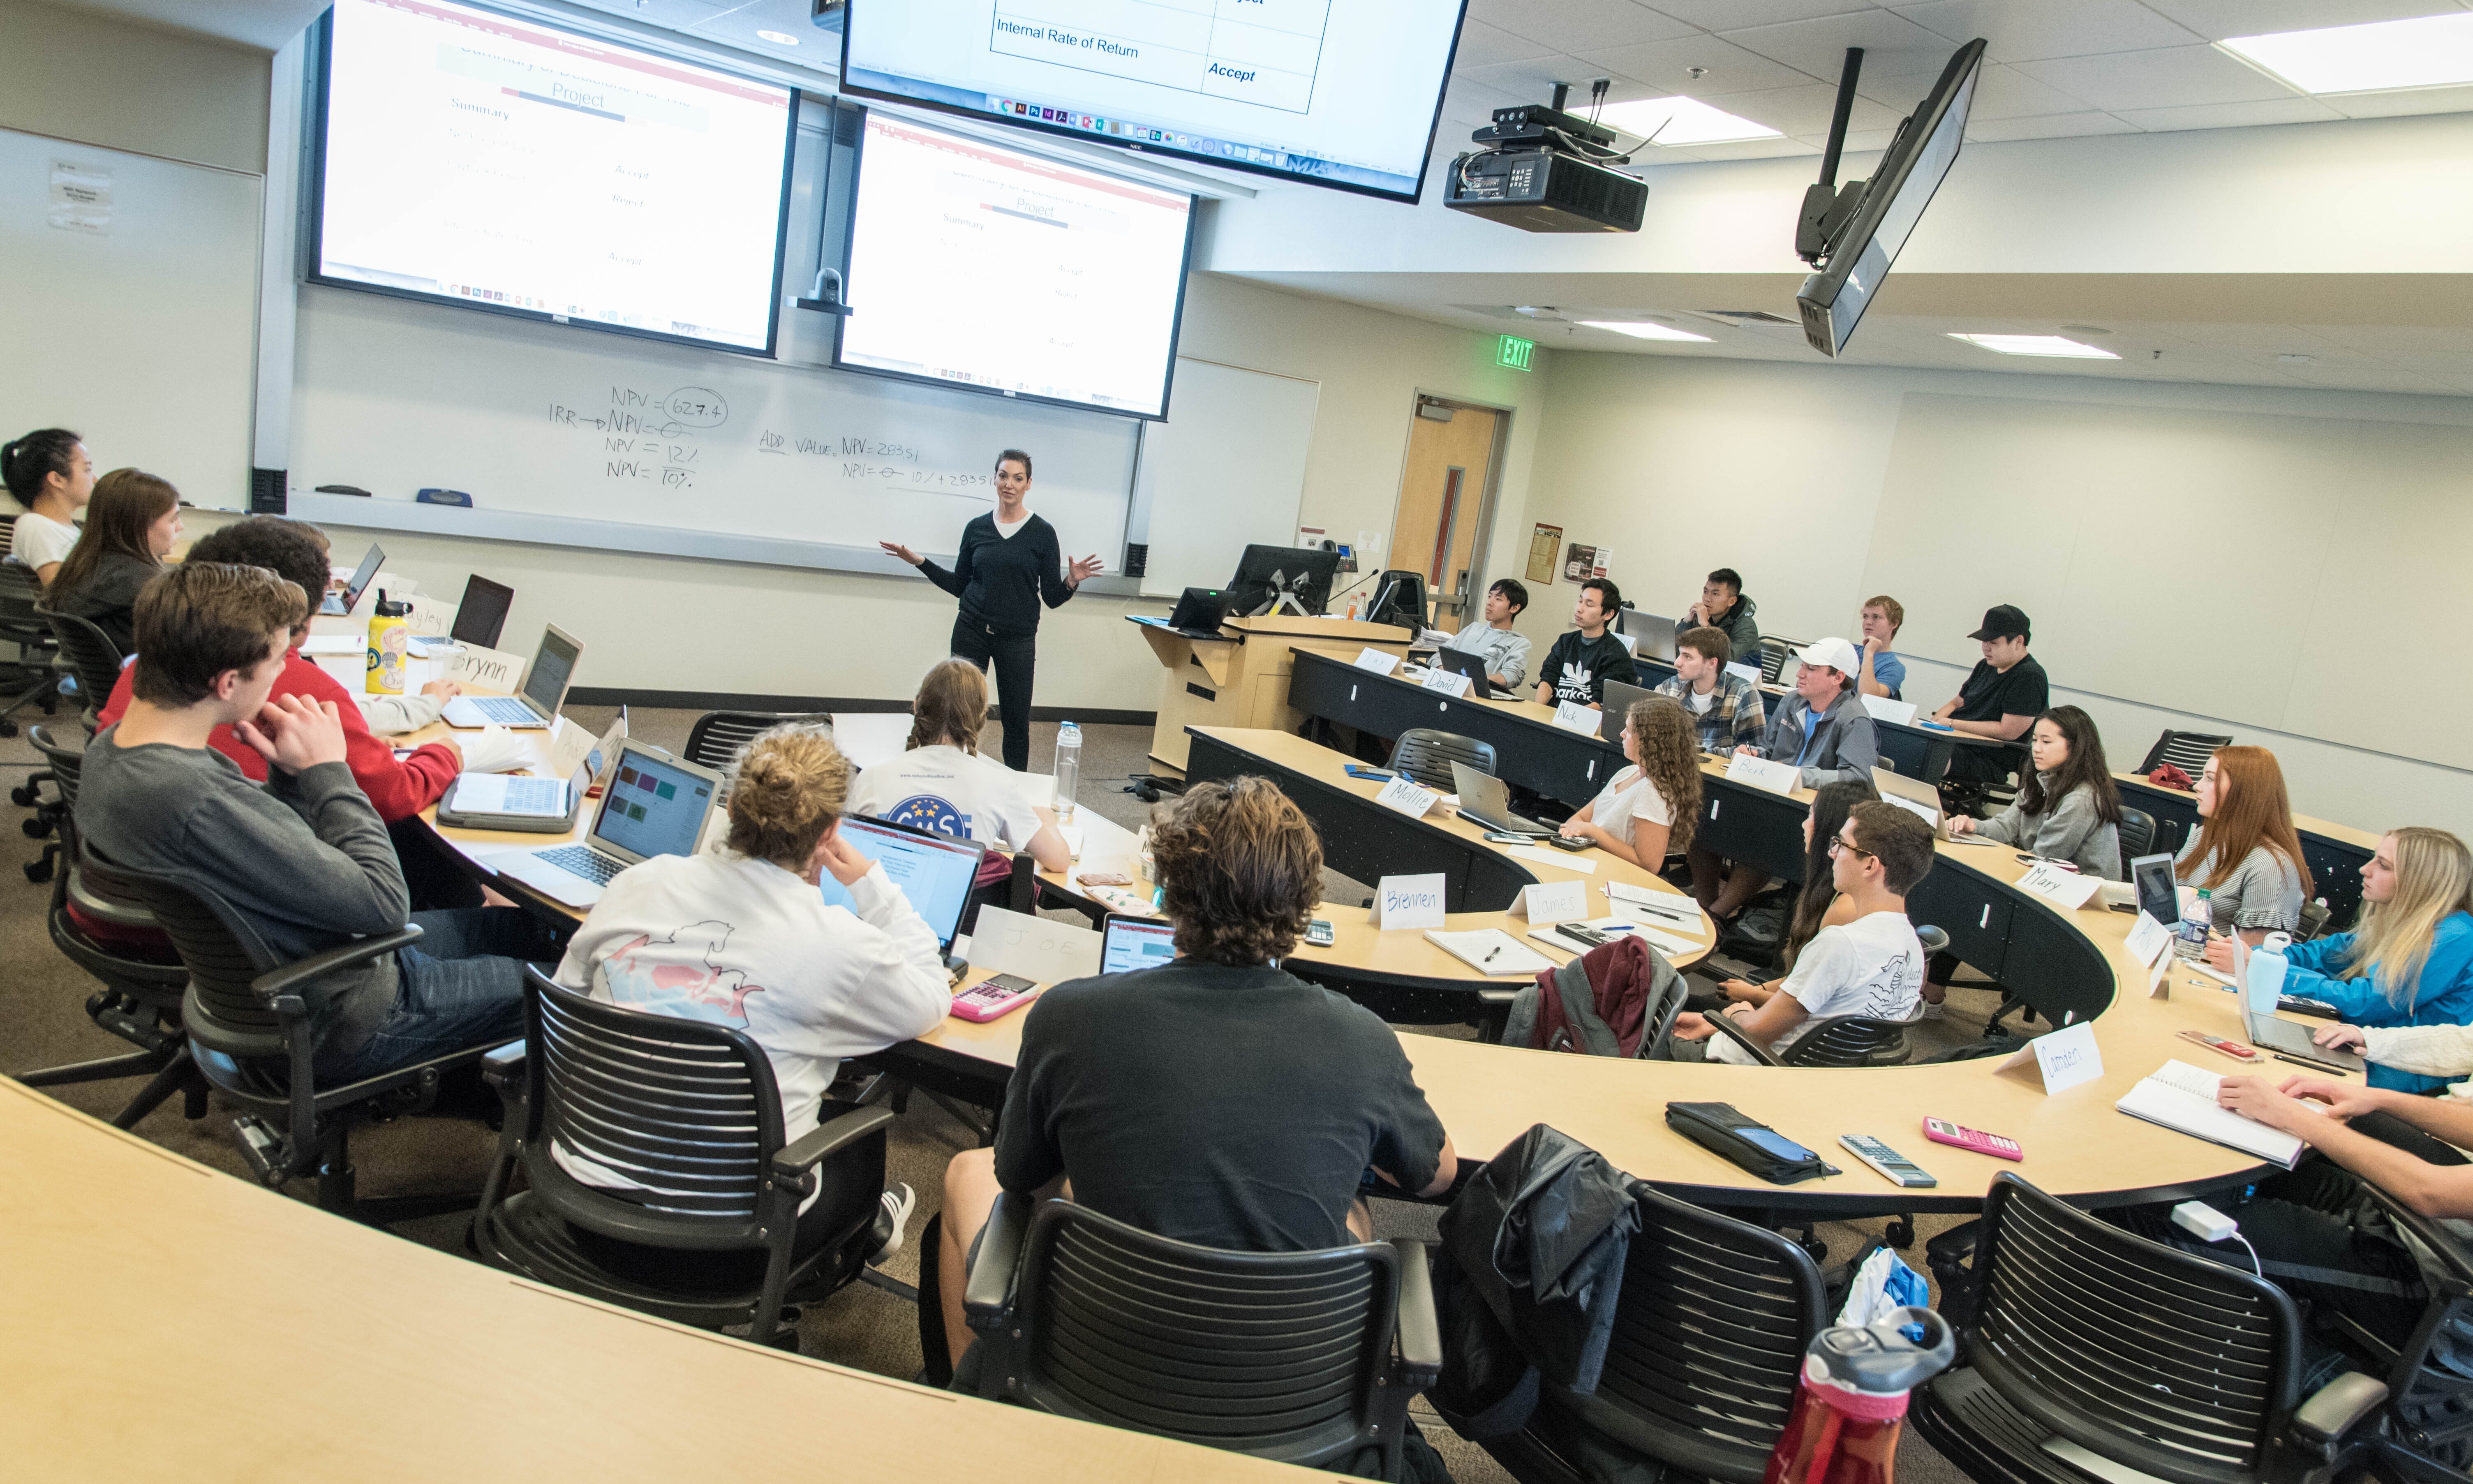 Alt text: Professor lecturing to a full classroom of students with multiple screens displaying information.